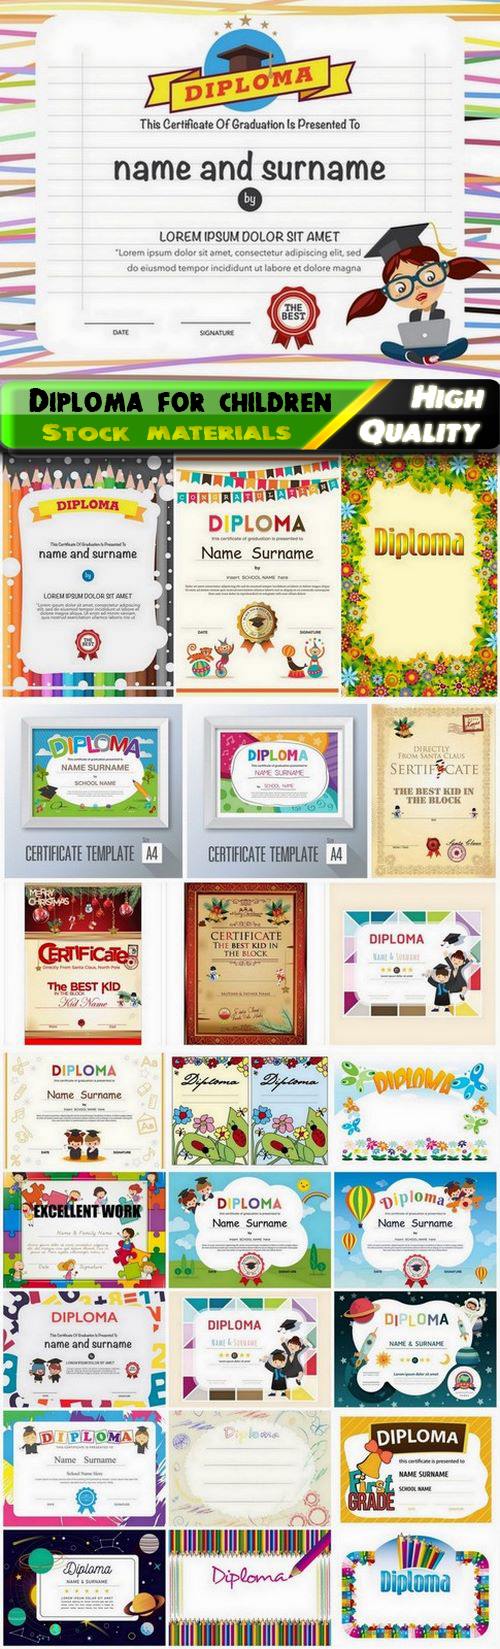 Greeting certificate and diploma for children and kids - 25 Eps